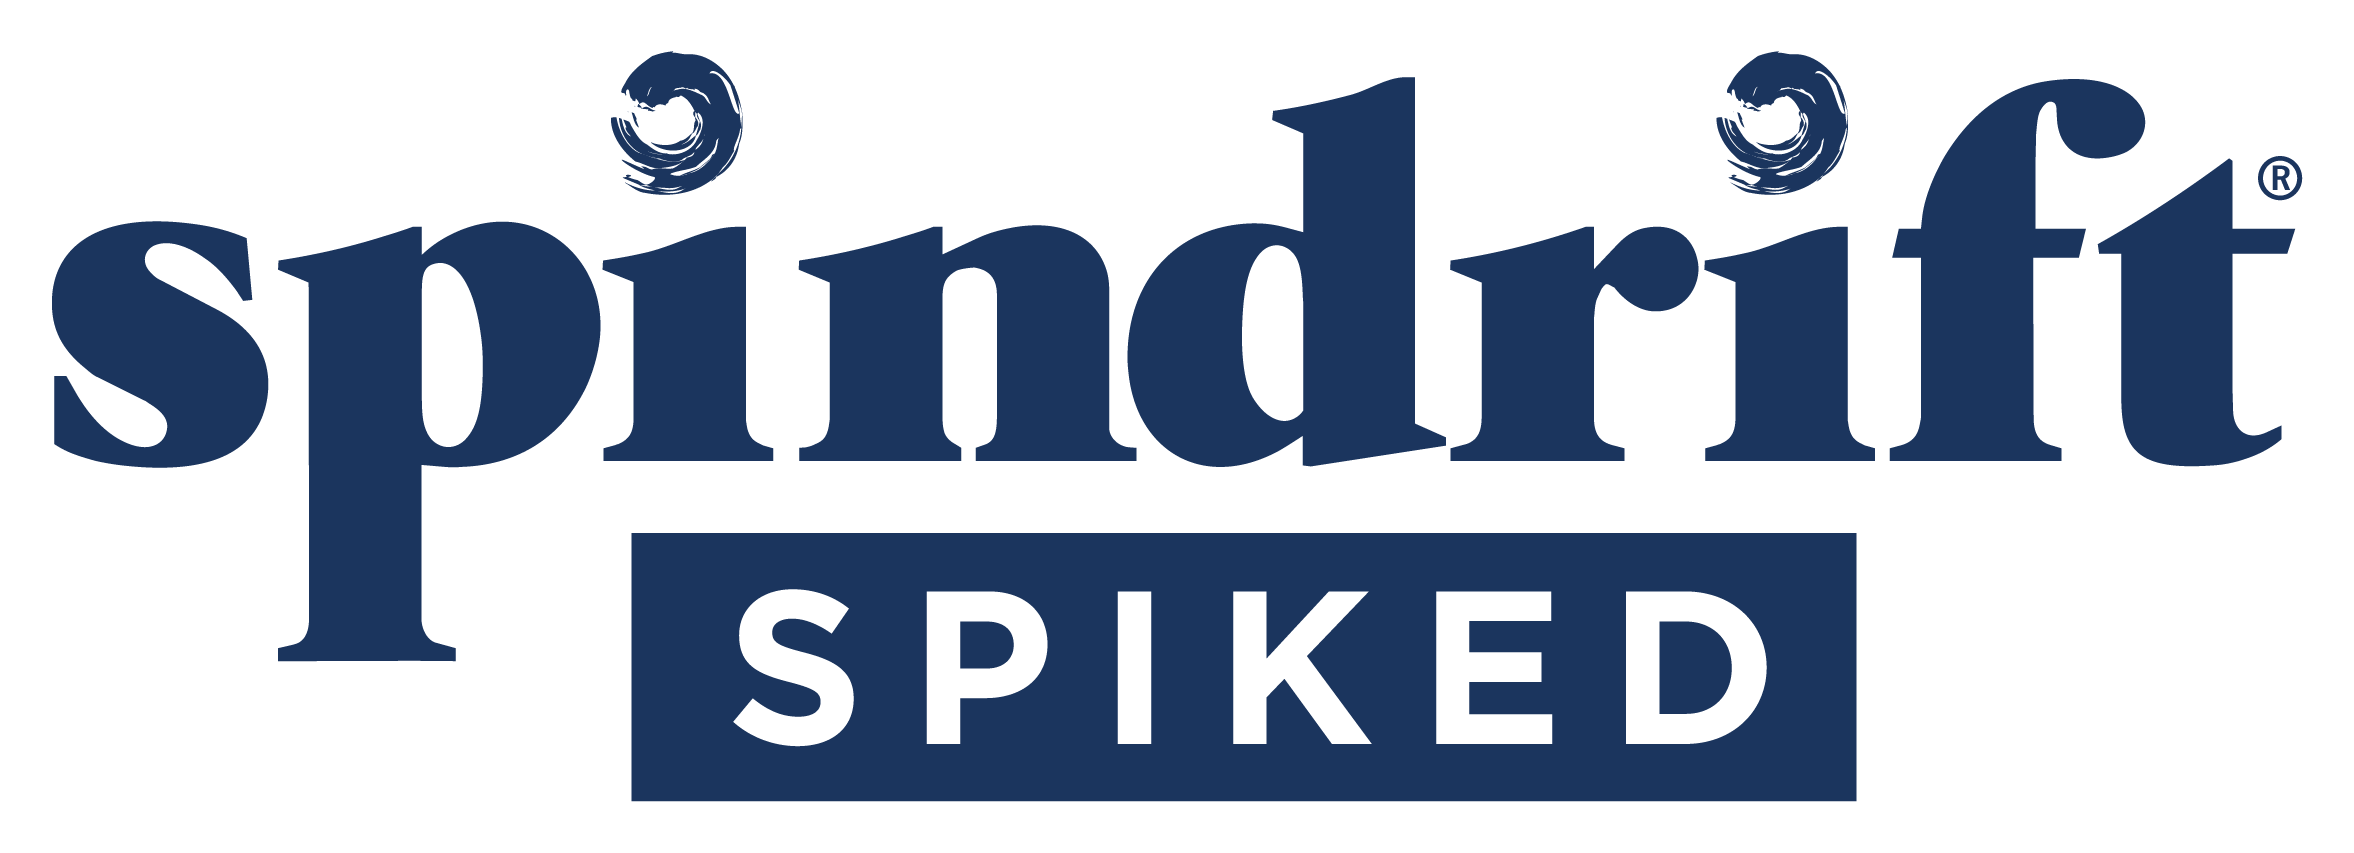 Spindrift Spiked Logo Navy.png